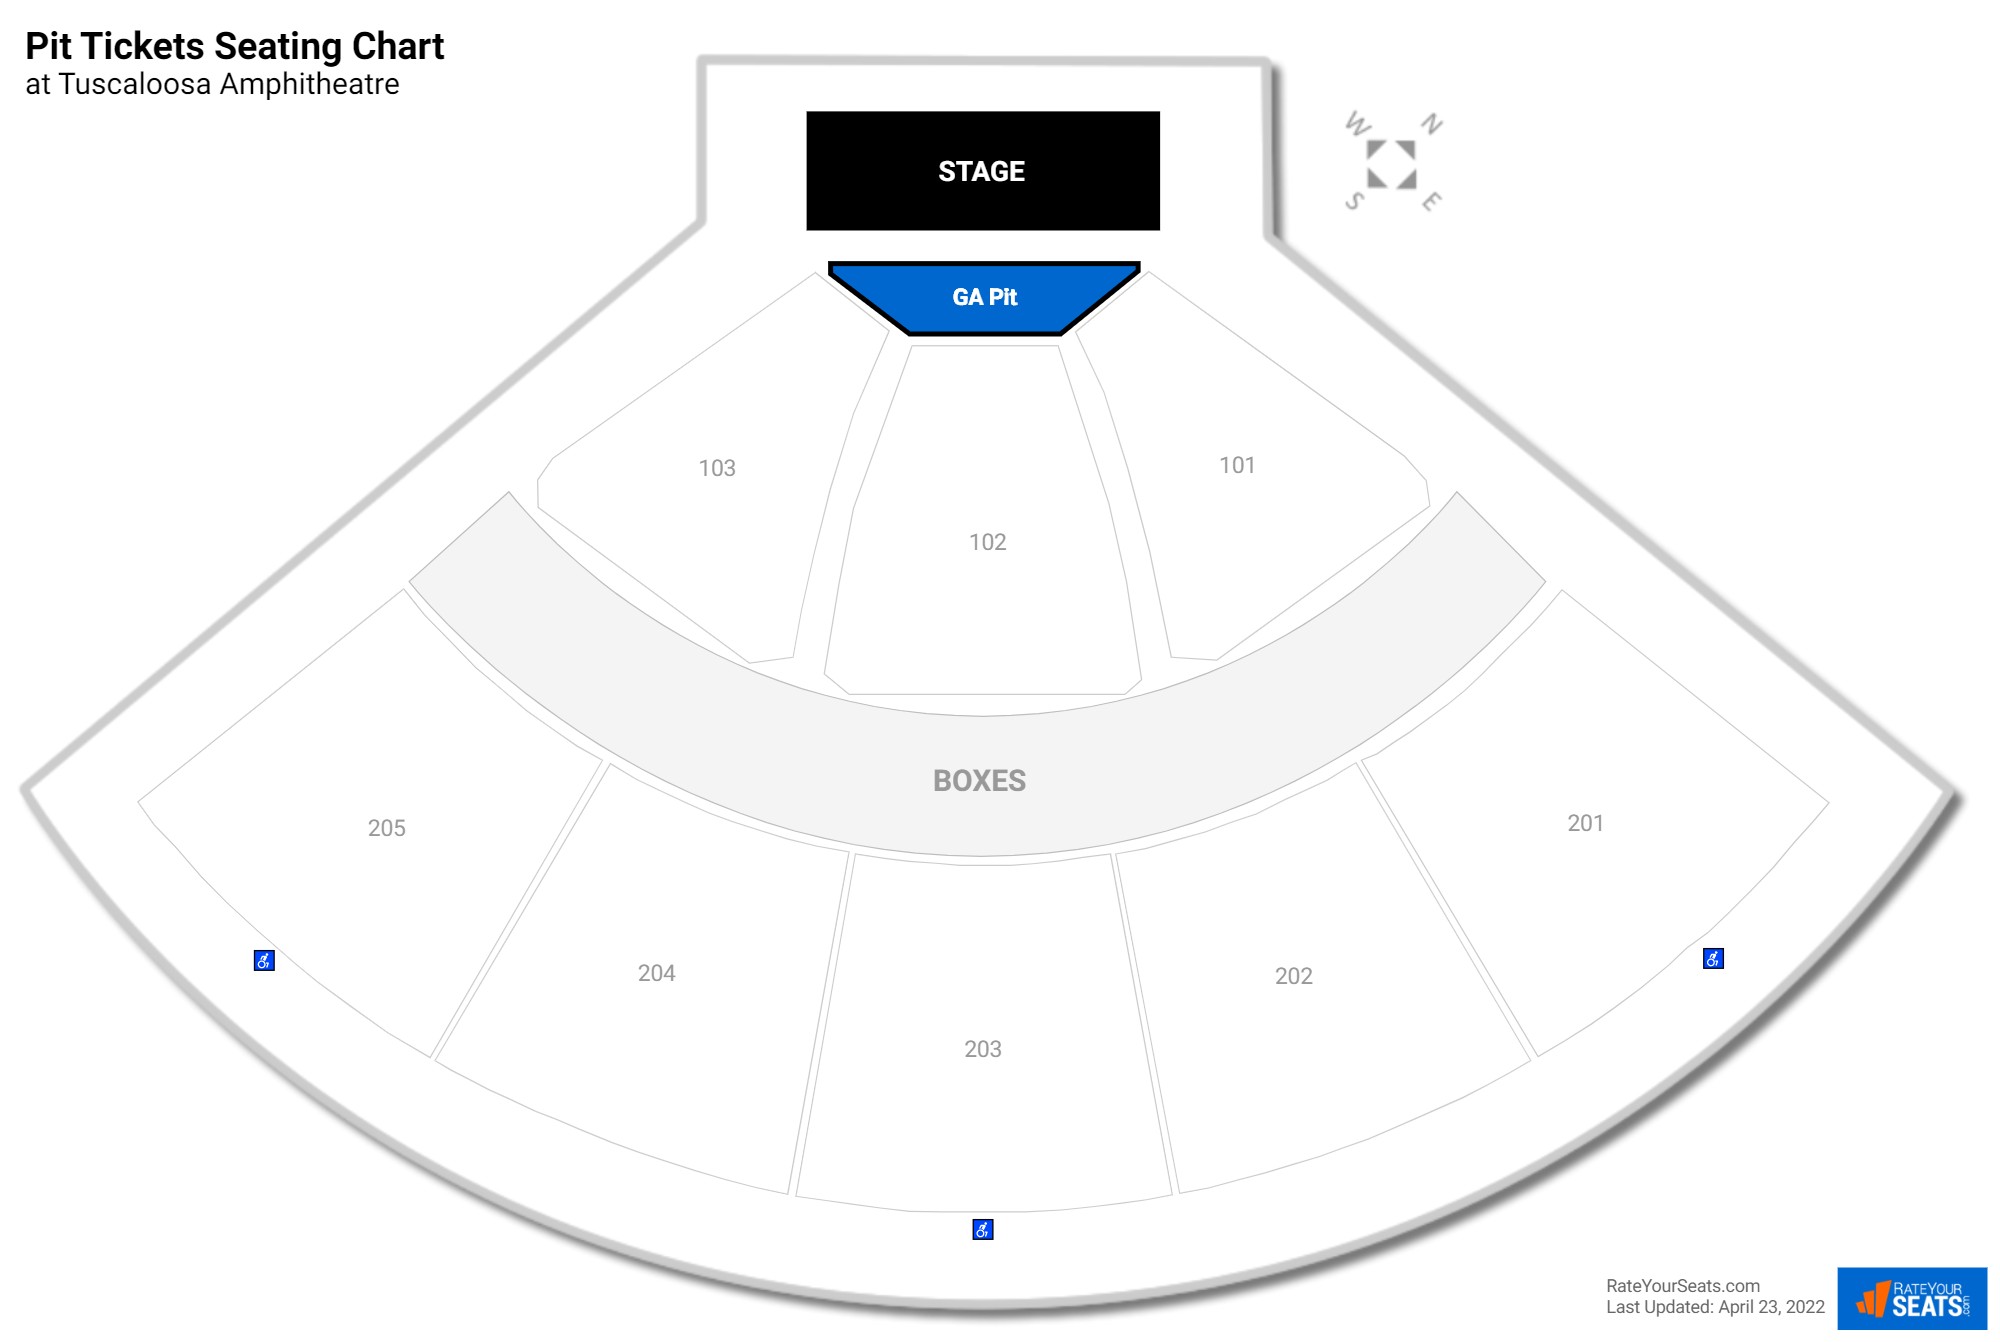 Concert Pit Tickets Seating Chart at Tuscaloosa Amphitheatre